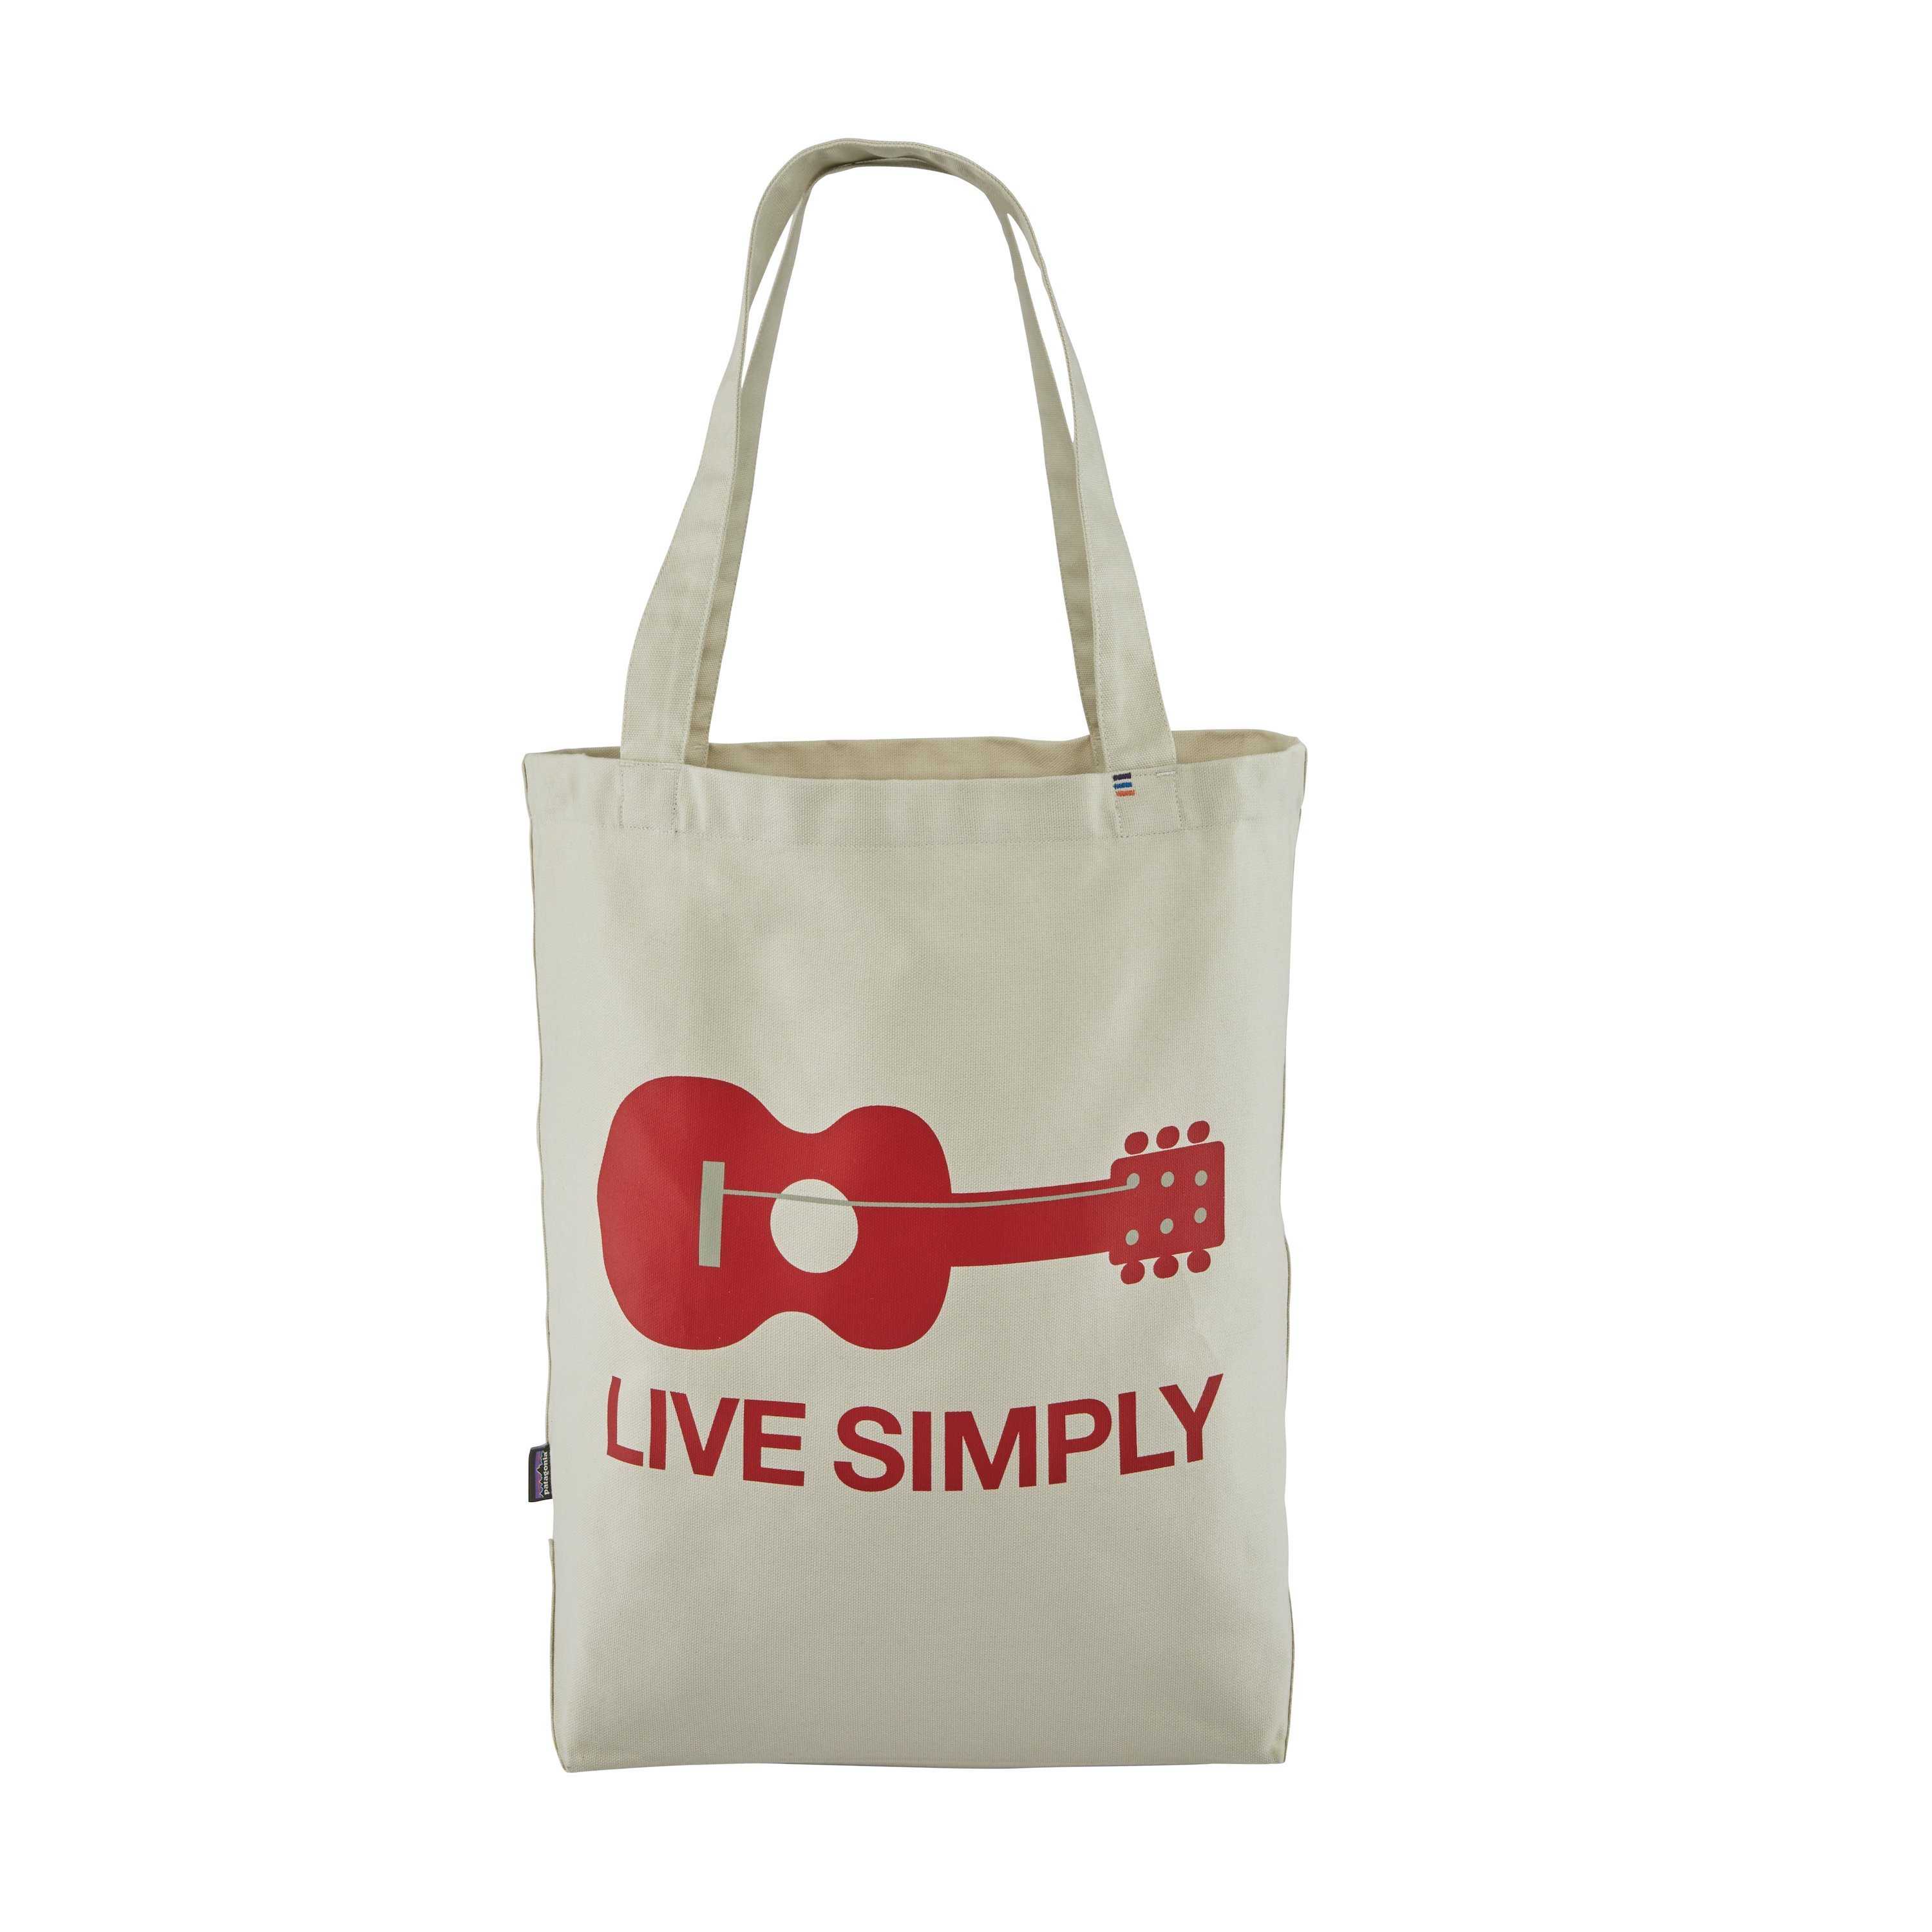 Patagonia Market Tote - Durable Bag from Organic Cotton, Live Simply Guitar: Bleached Stone